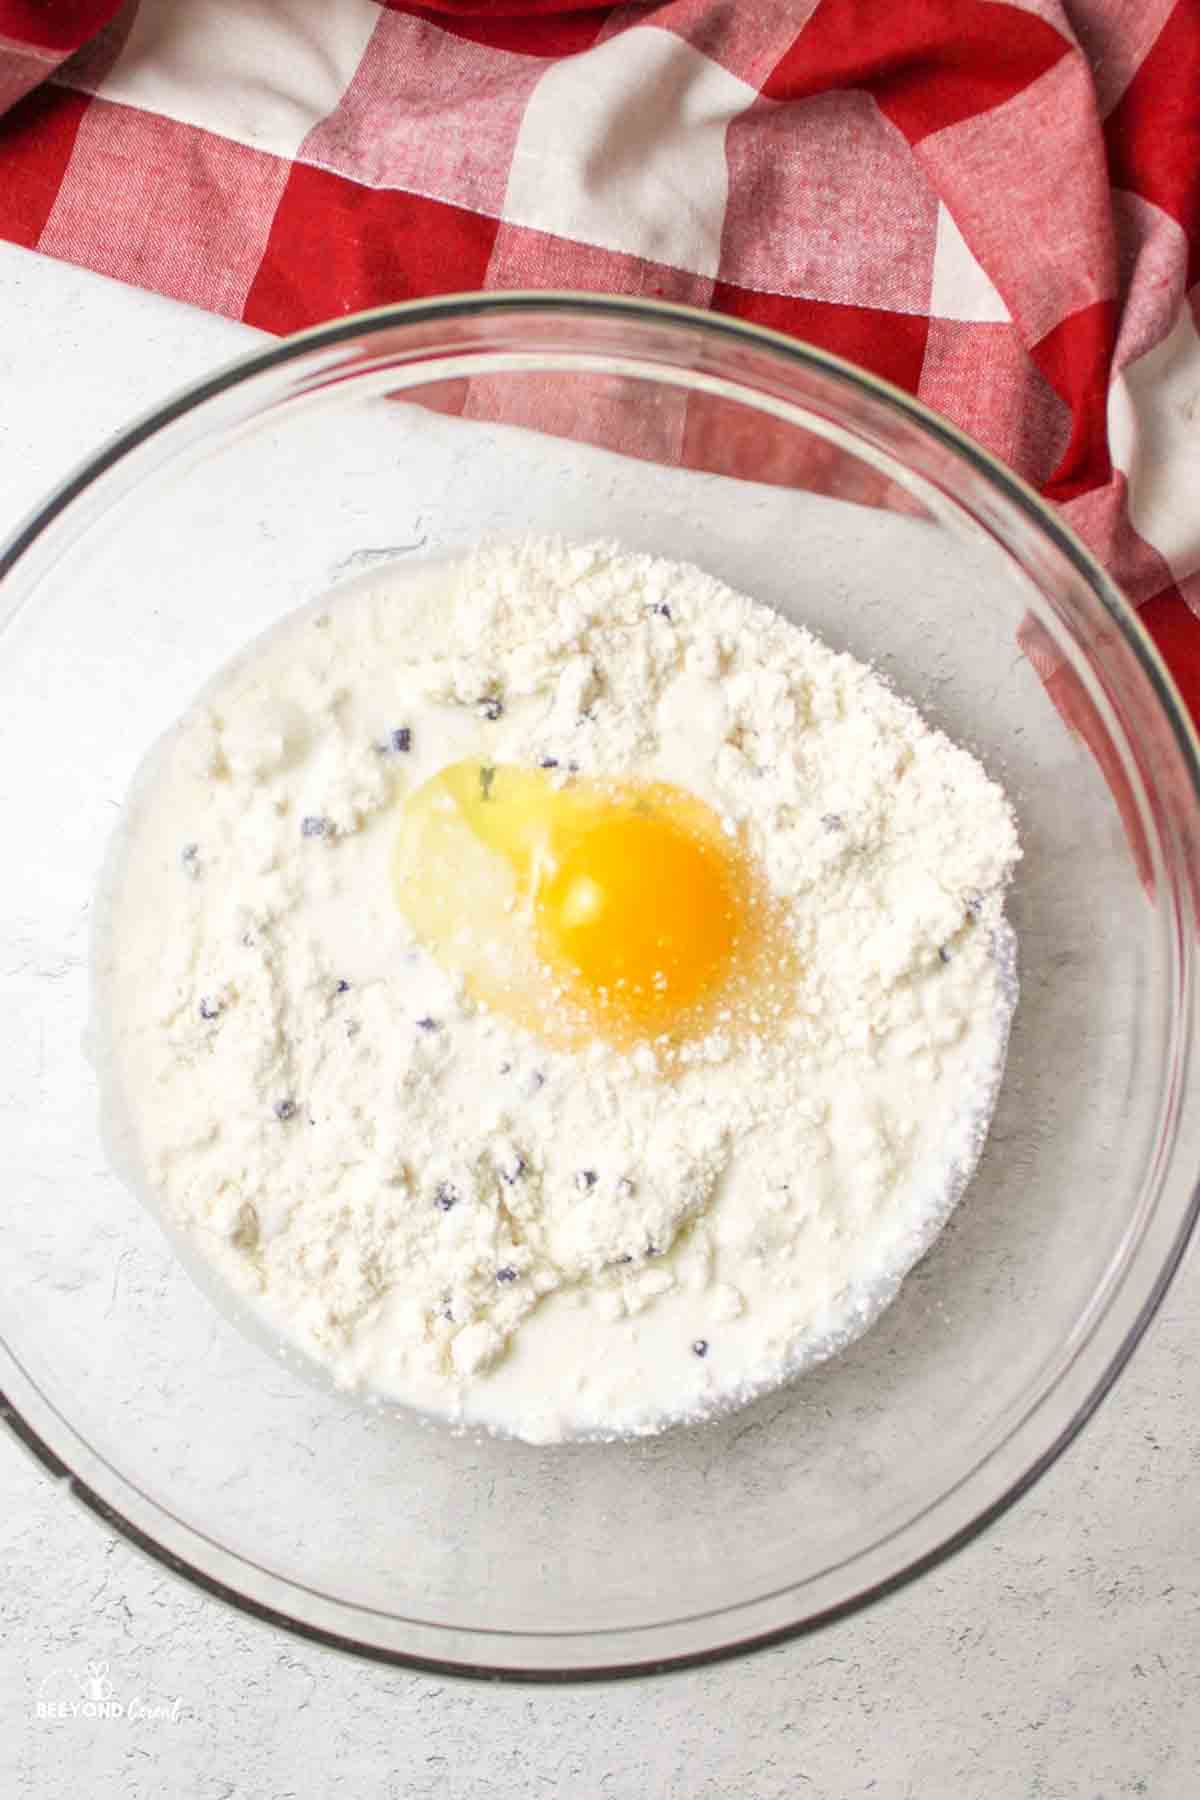 muffin mix, egg, and milk in a mixing bowl